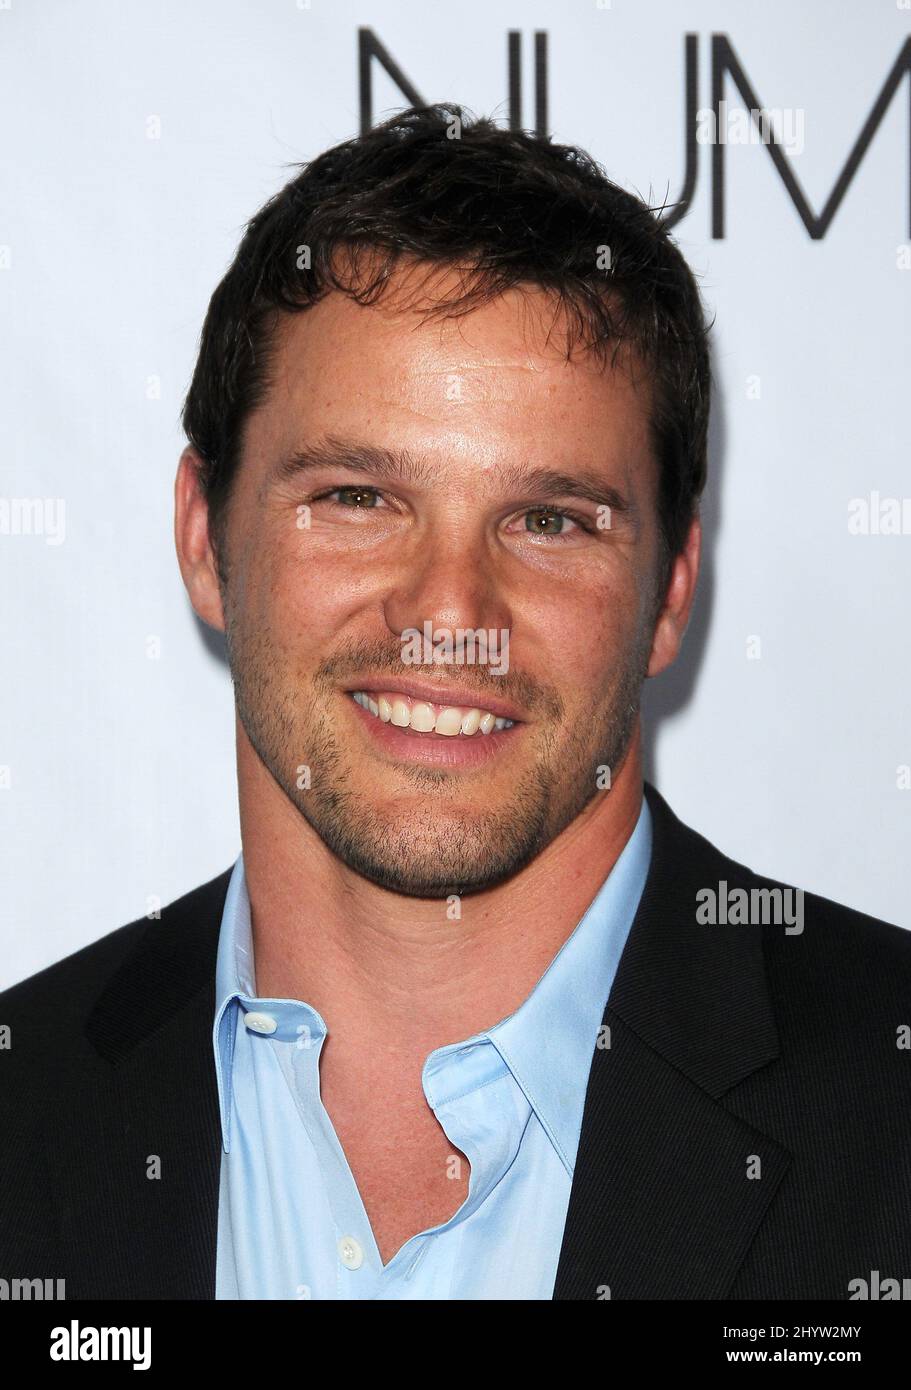 Dylan Bruno arrives at the 100th Episode of 'Numb3rs' Party Held at the Sunset Tower, Hollywood, USA Stock Photo